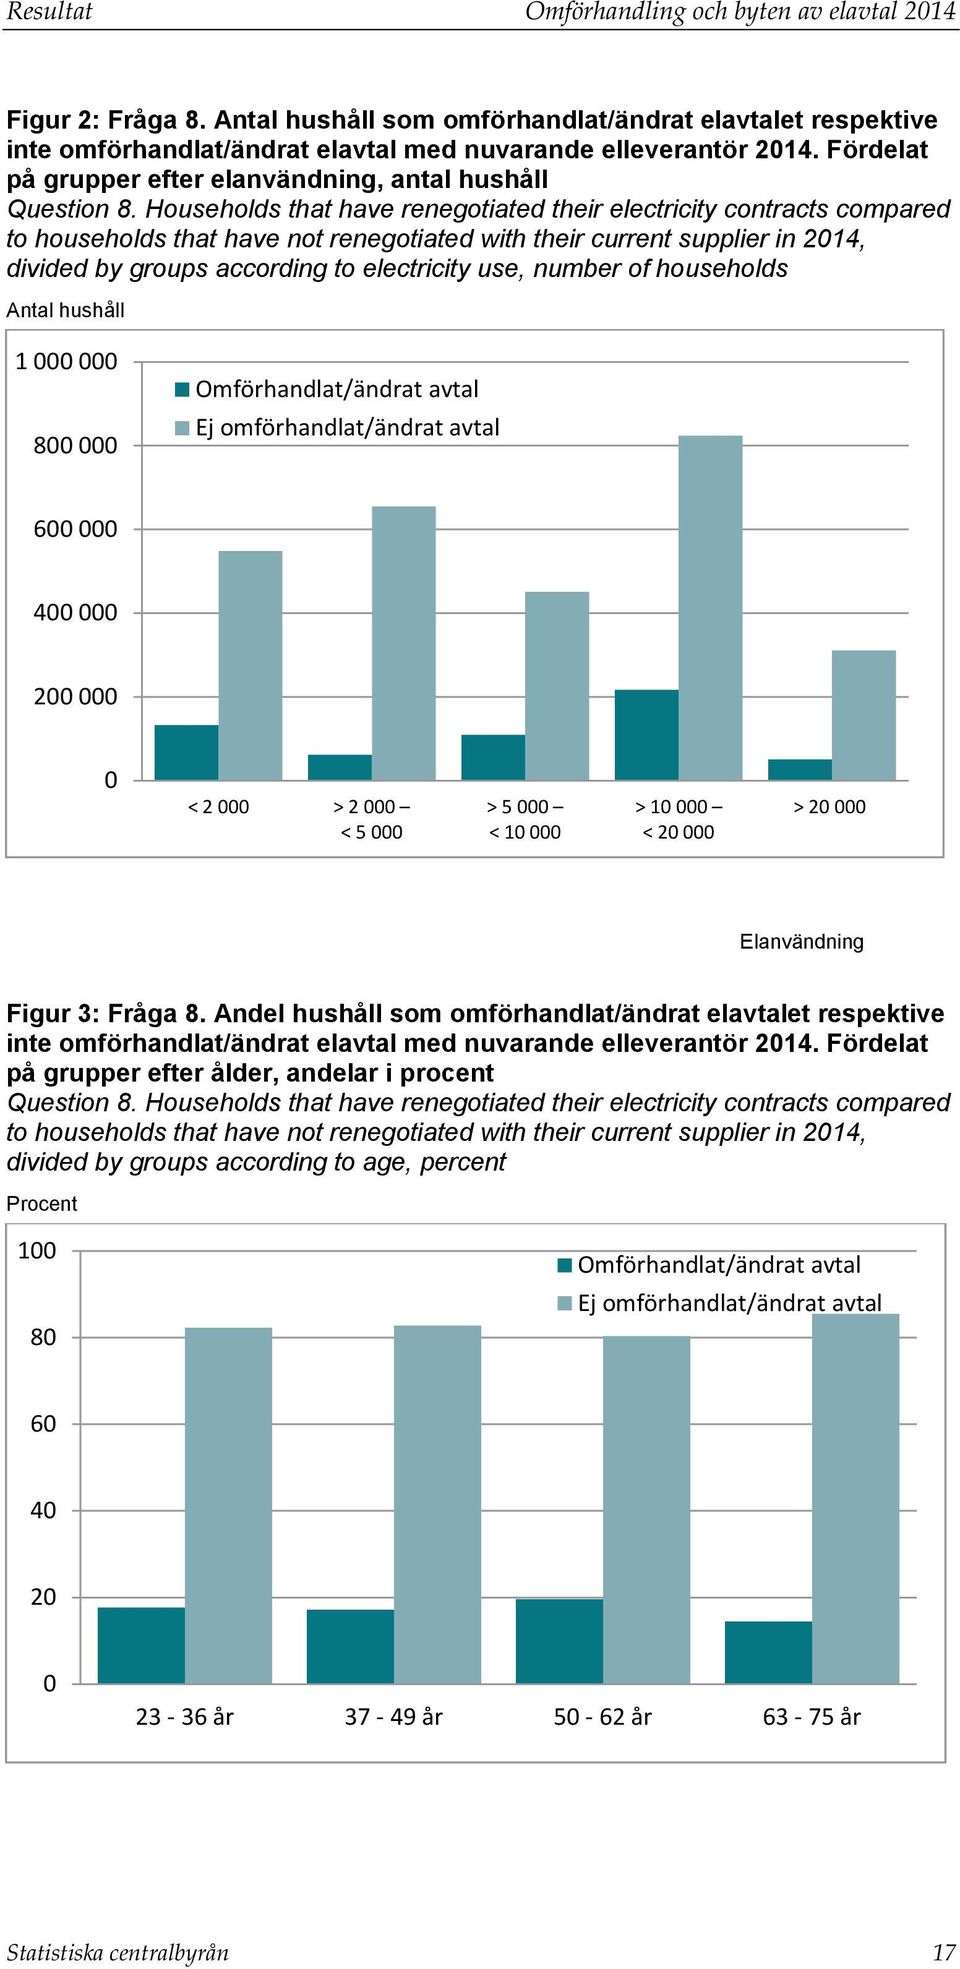 Households that have renegotiated their electricity contracts compared to households that have not renegotiated with their current supplier in 2014, divided by groups according to electricity use,